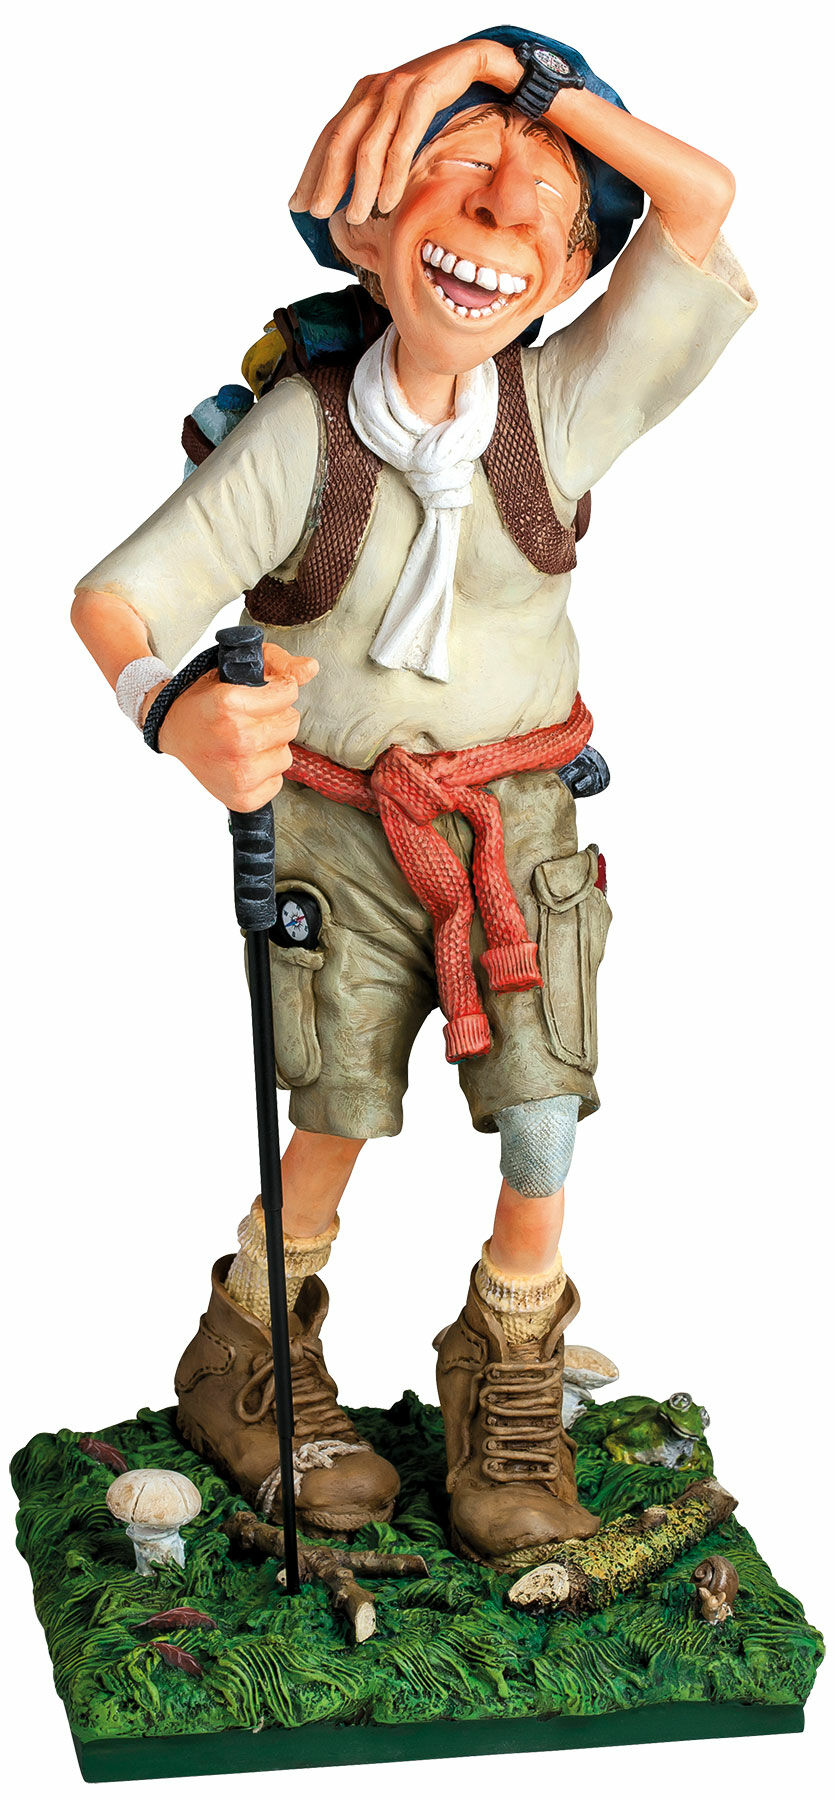 Caricature "The Hiker", hand-painted cast by Guillermo Forchino